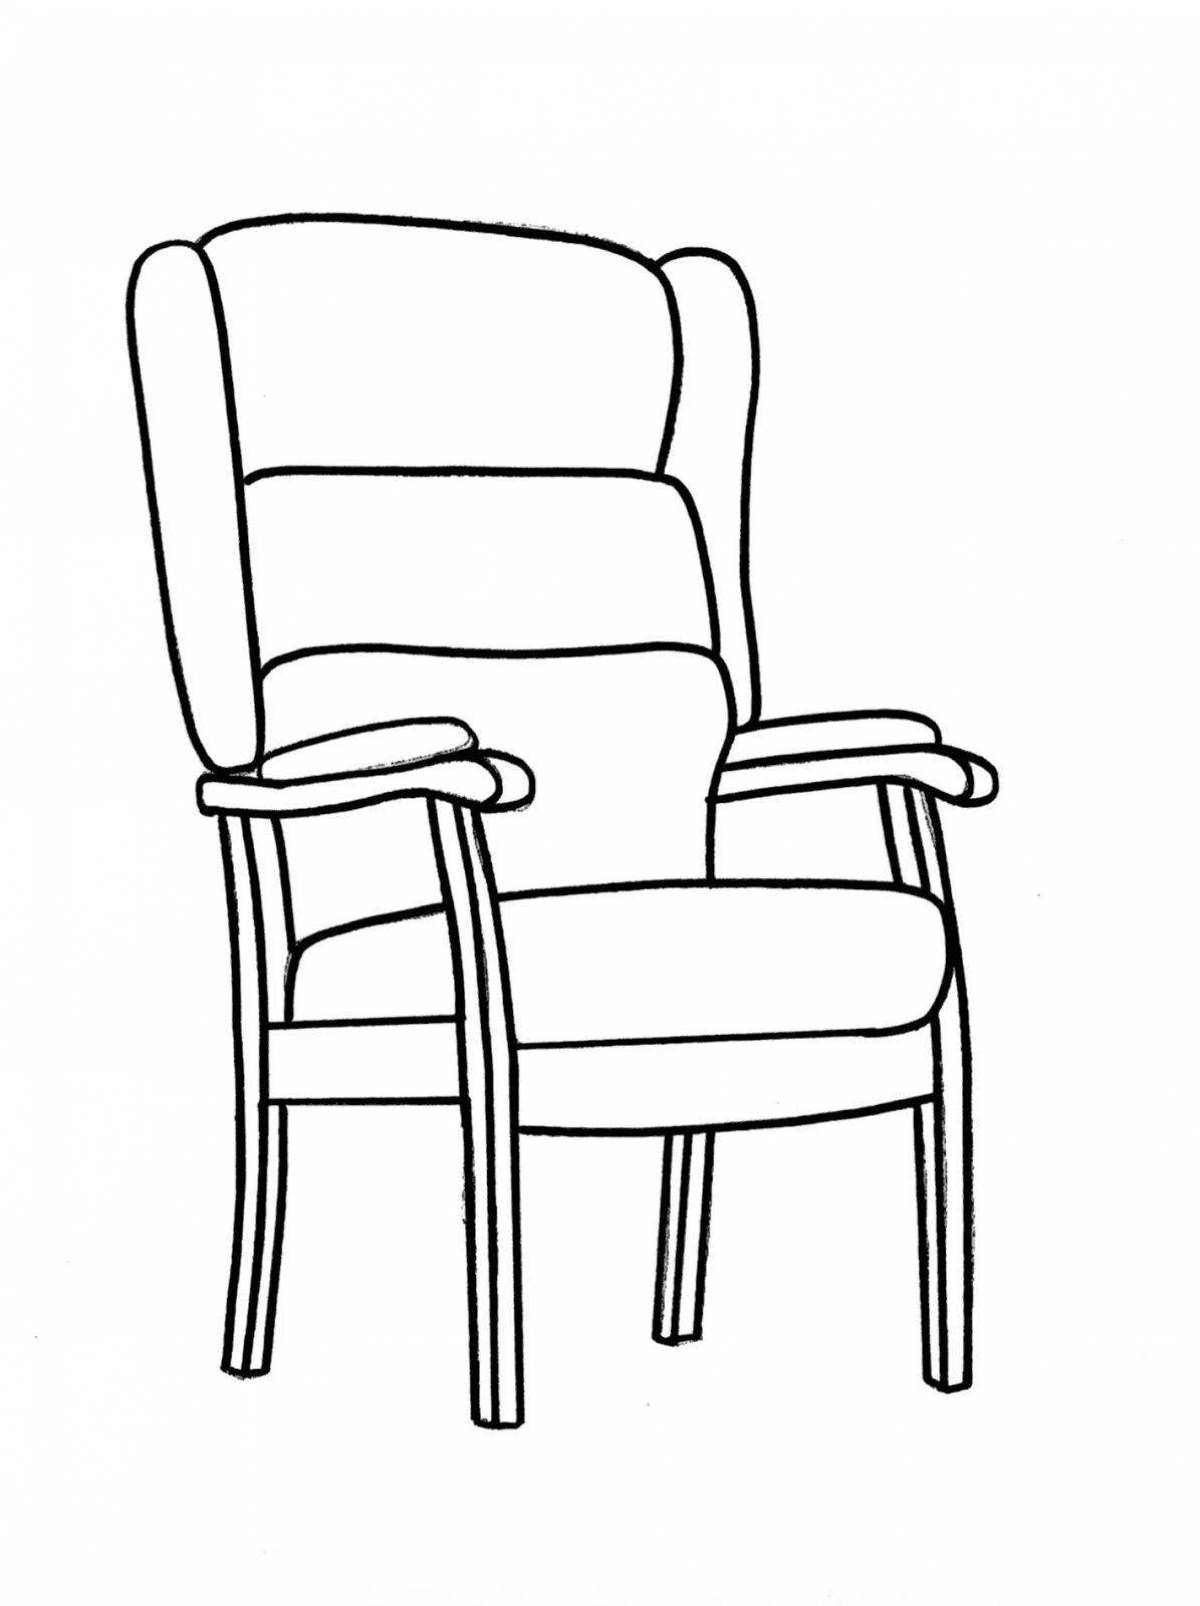 Coloring book shining chair for children